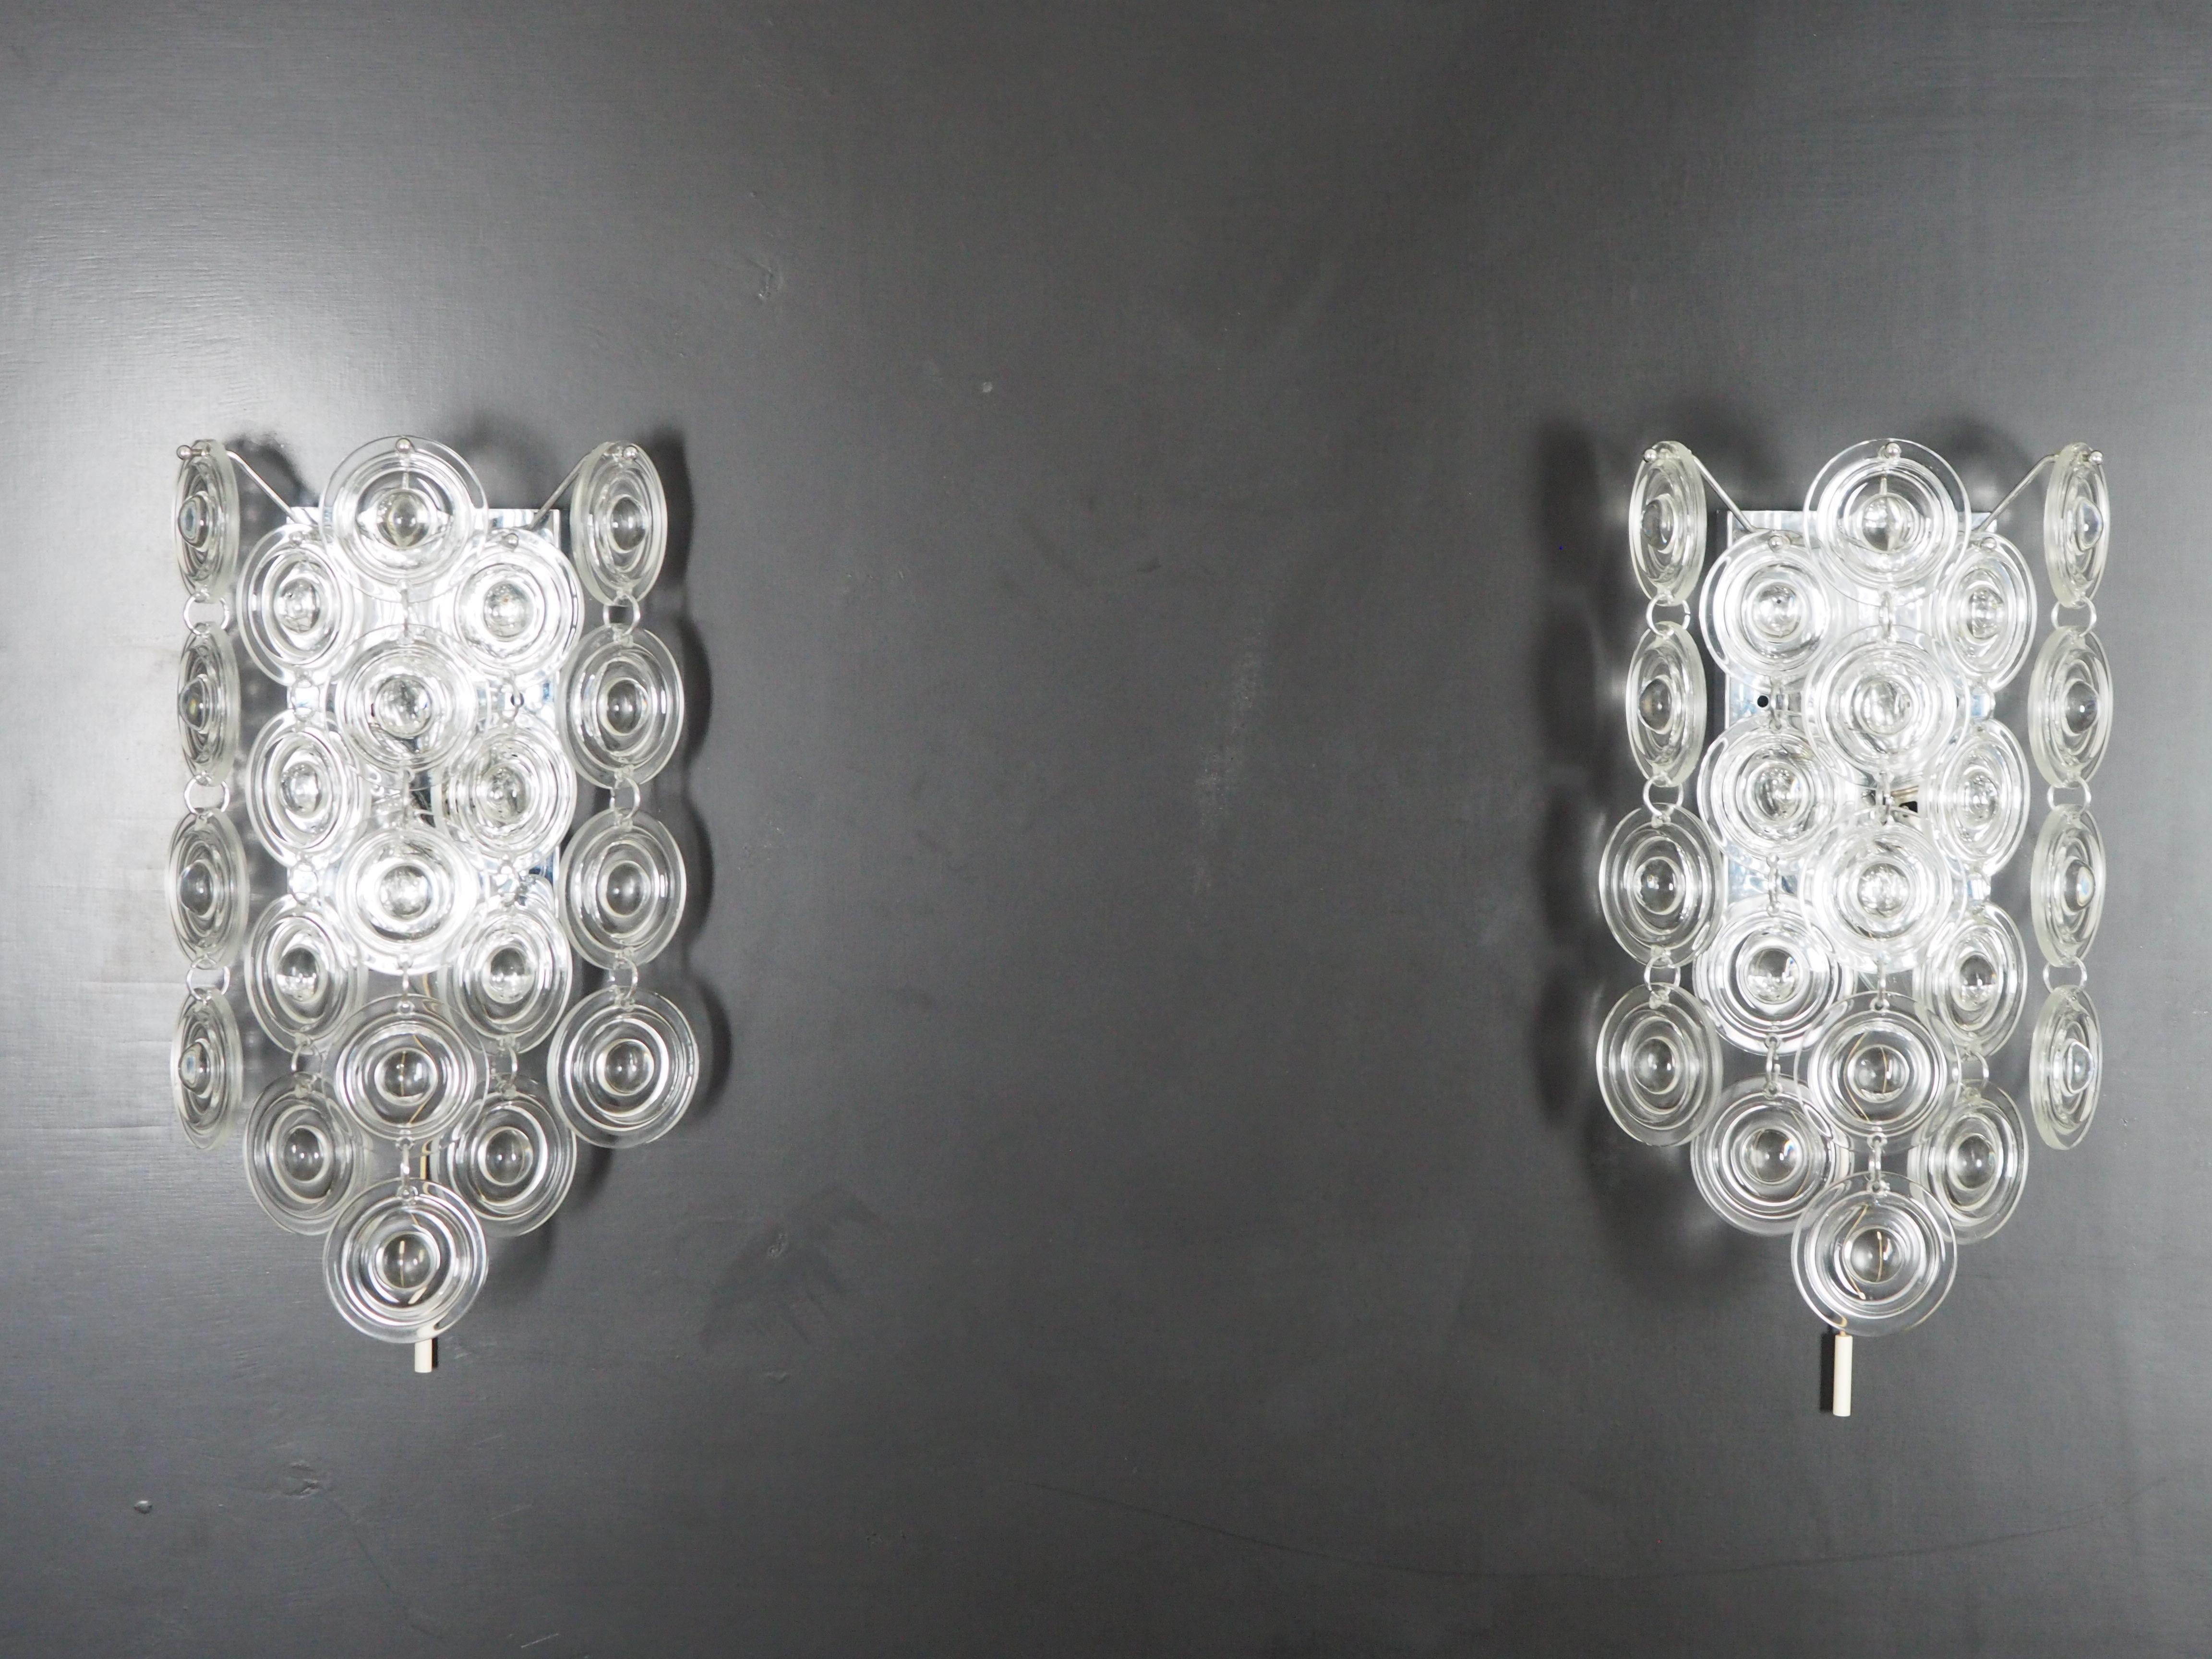 Pair of Rare Glass and Nickel Wall Sconces by Sciolari, Italy, circa 1970s For Sale 7